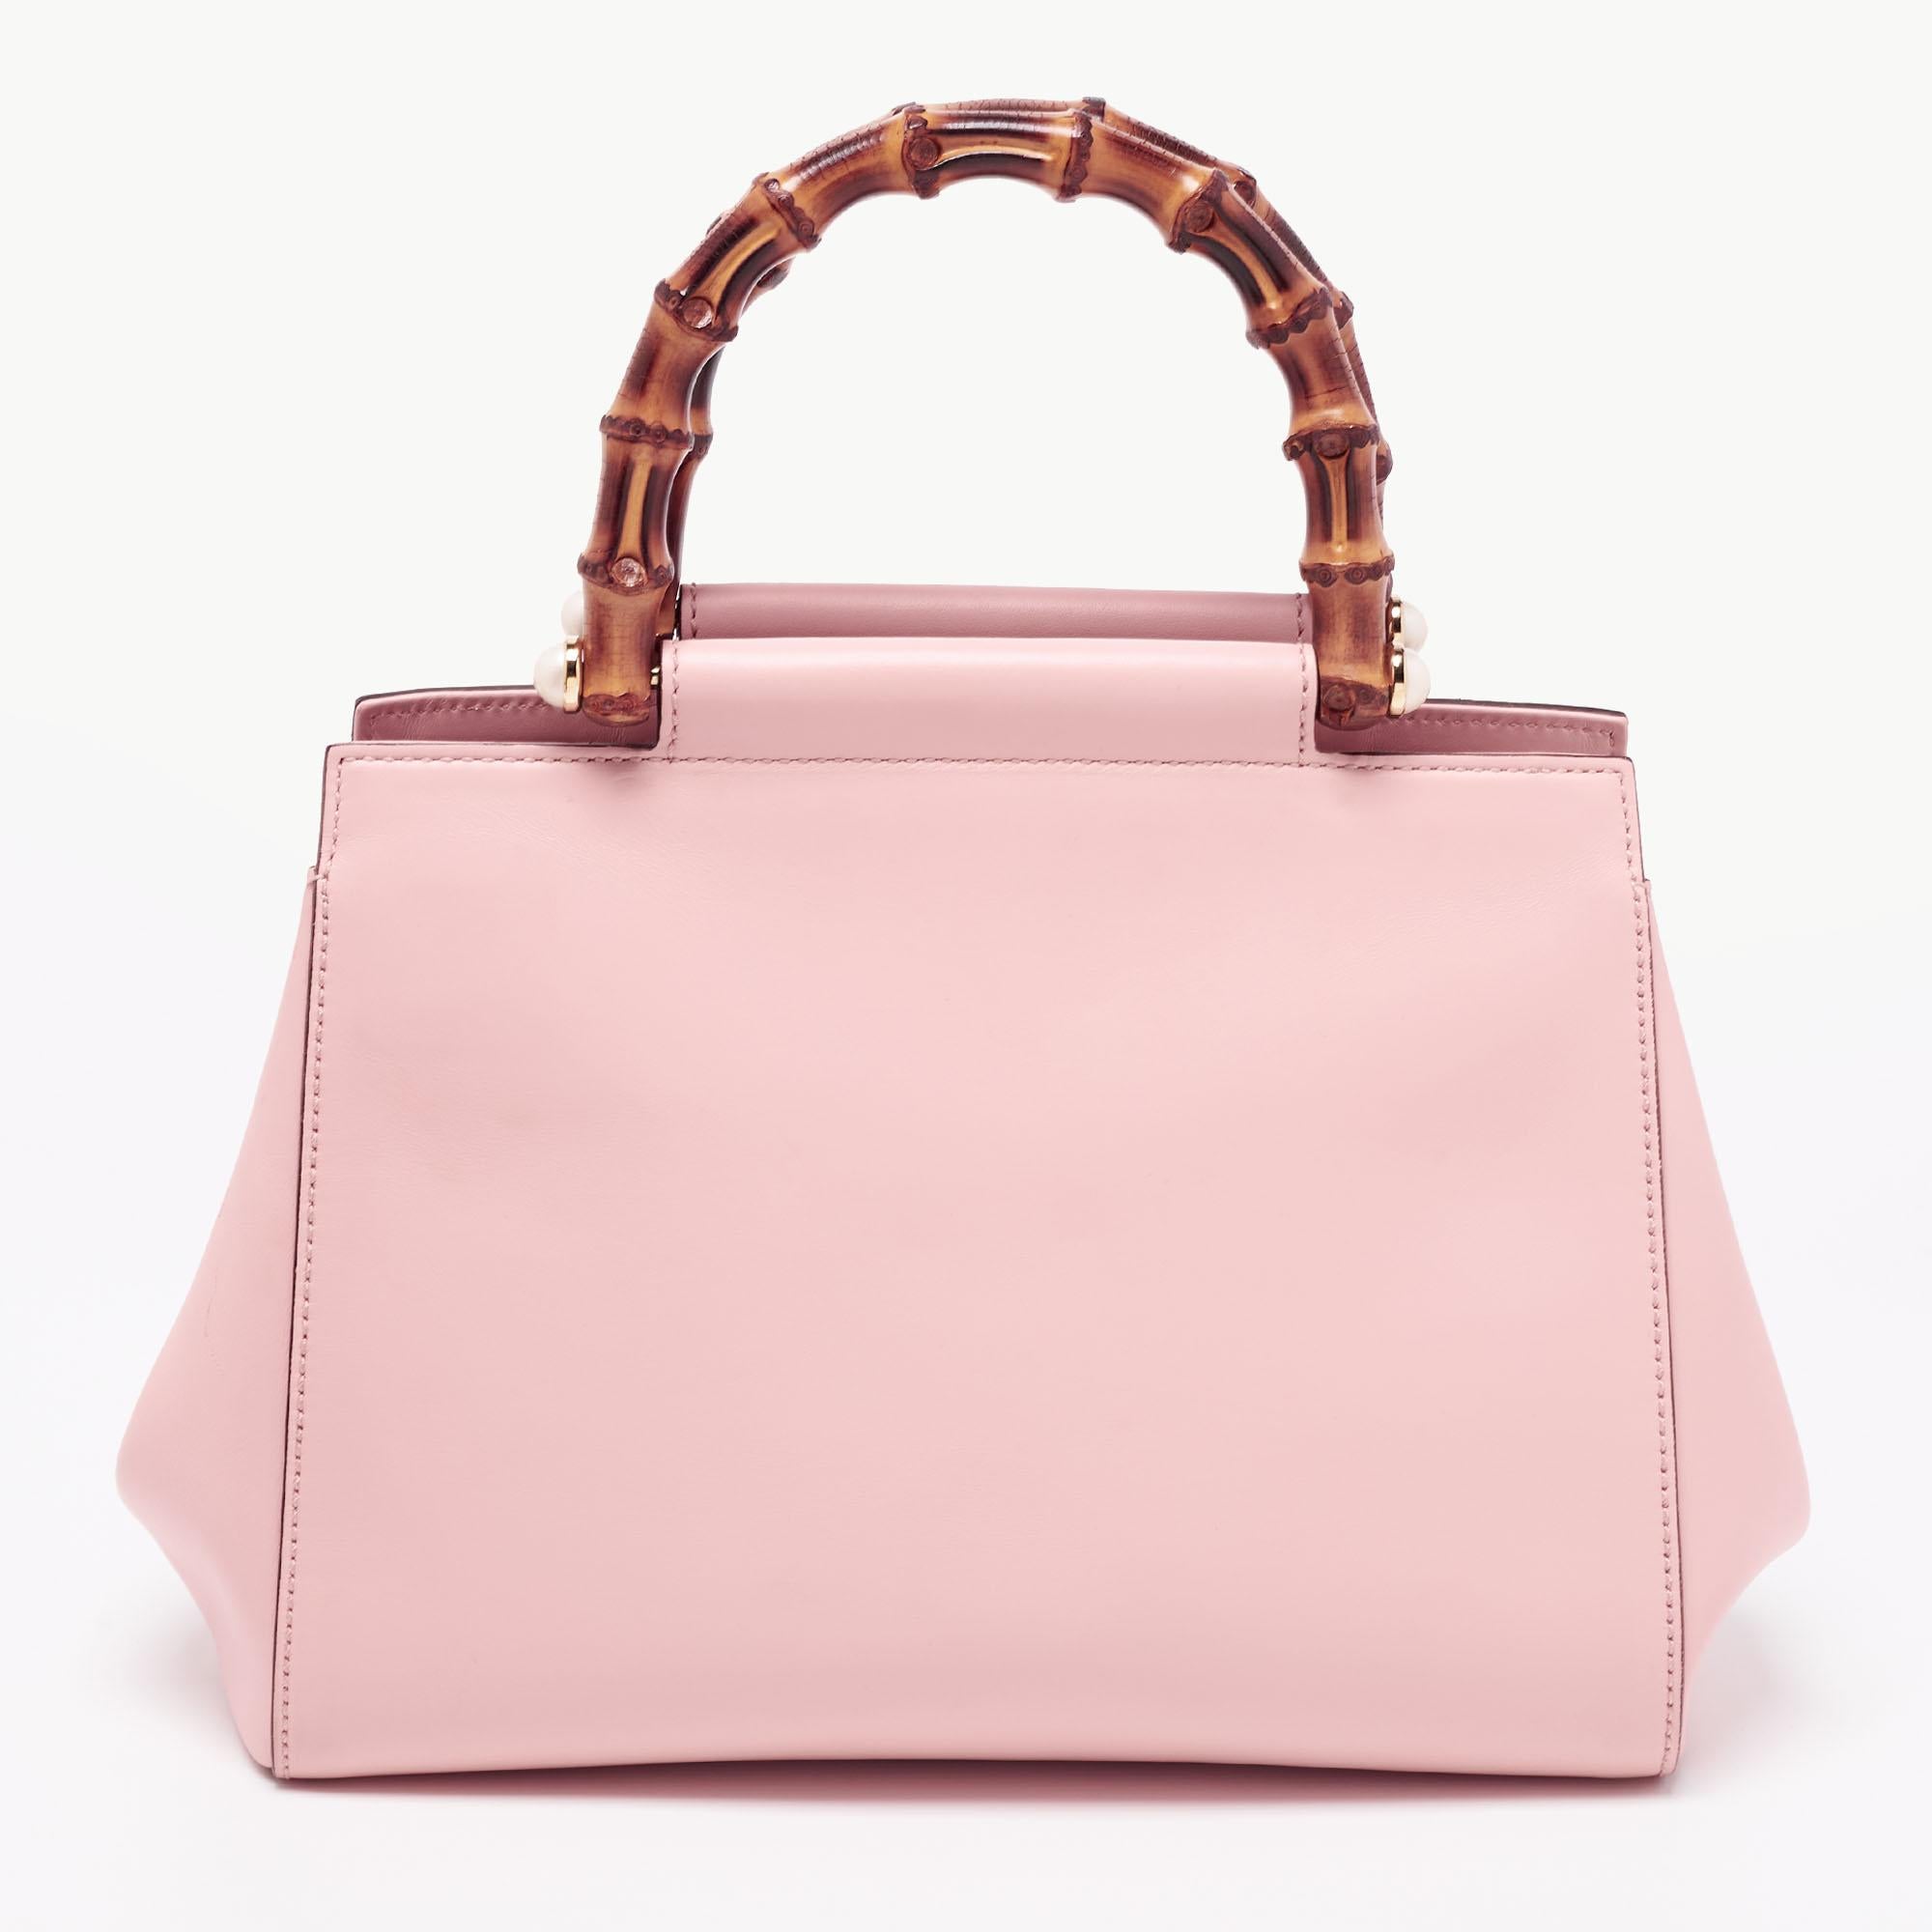 This gorgeous Gucci tote is an example of contemporary design. Look elegant and fashionable with this chic pink bag which is styled with bamboo handles featuring pearl details on each side. Crafted in leather and lined with Alcantara on the inside,